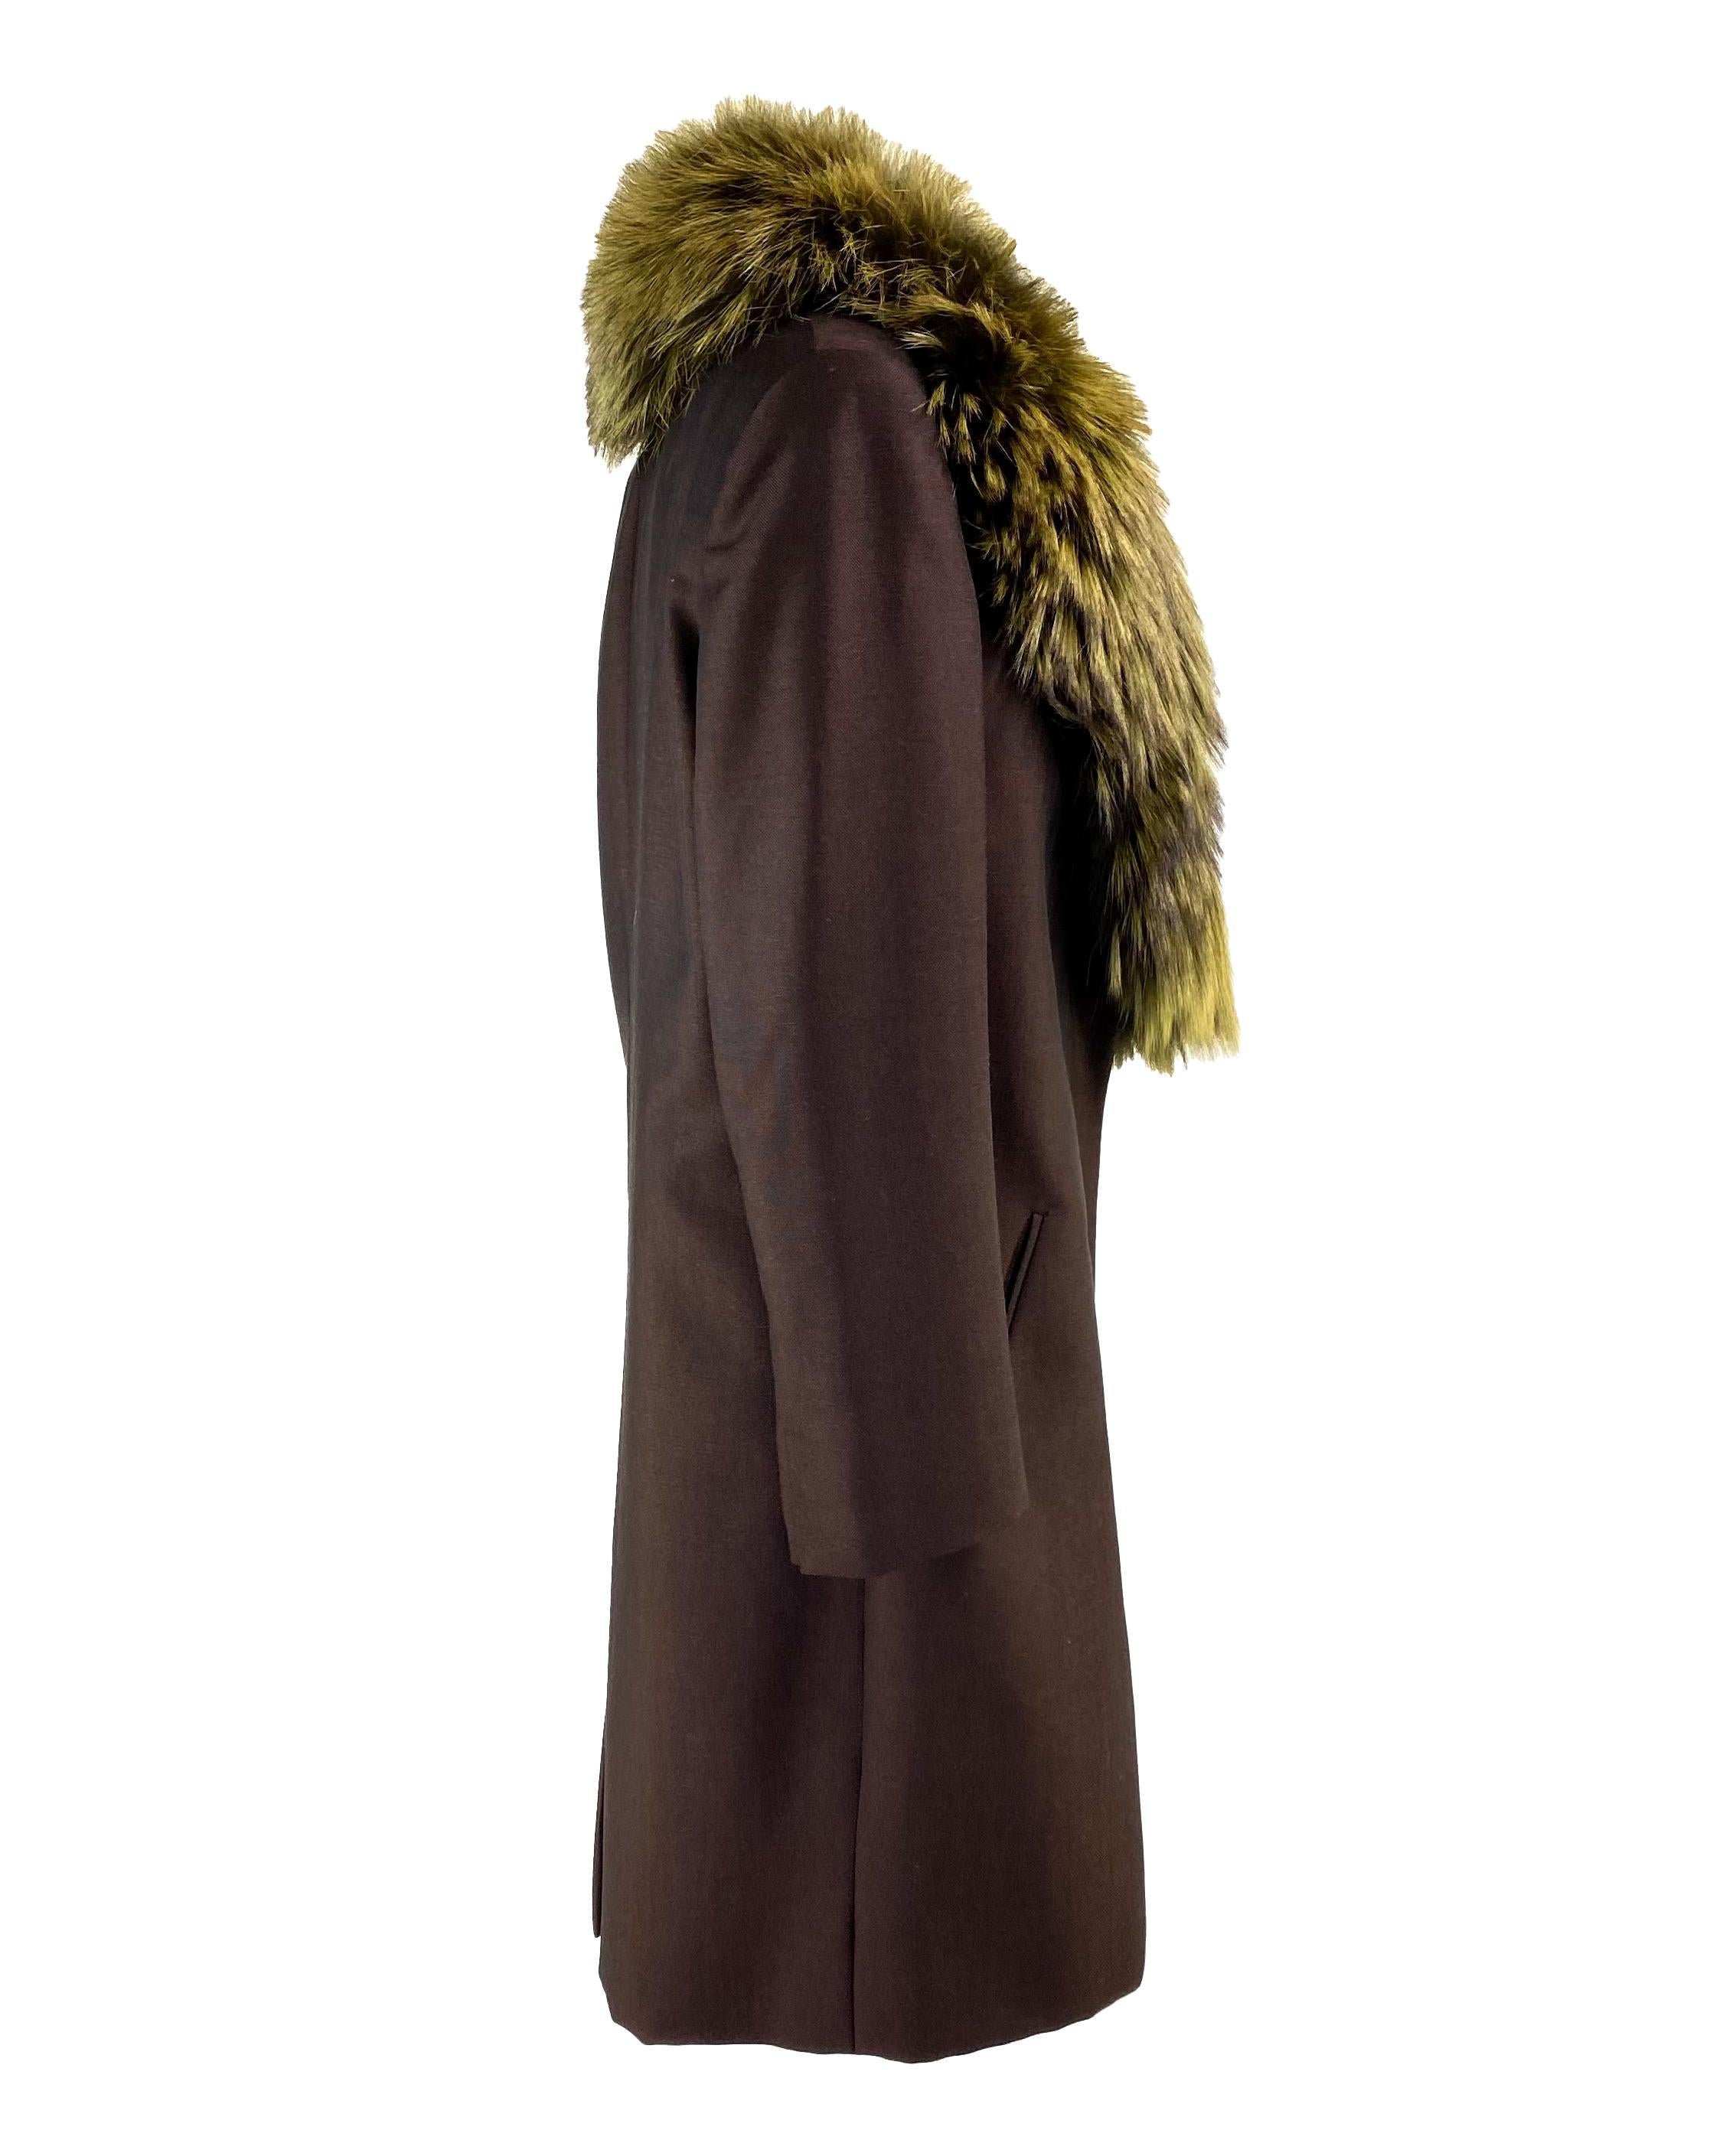 Women's F/W 1997 Gucci by Tom Ford Wool Mohair Coat with Green Fur Trim Runway For Sale